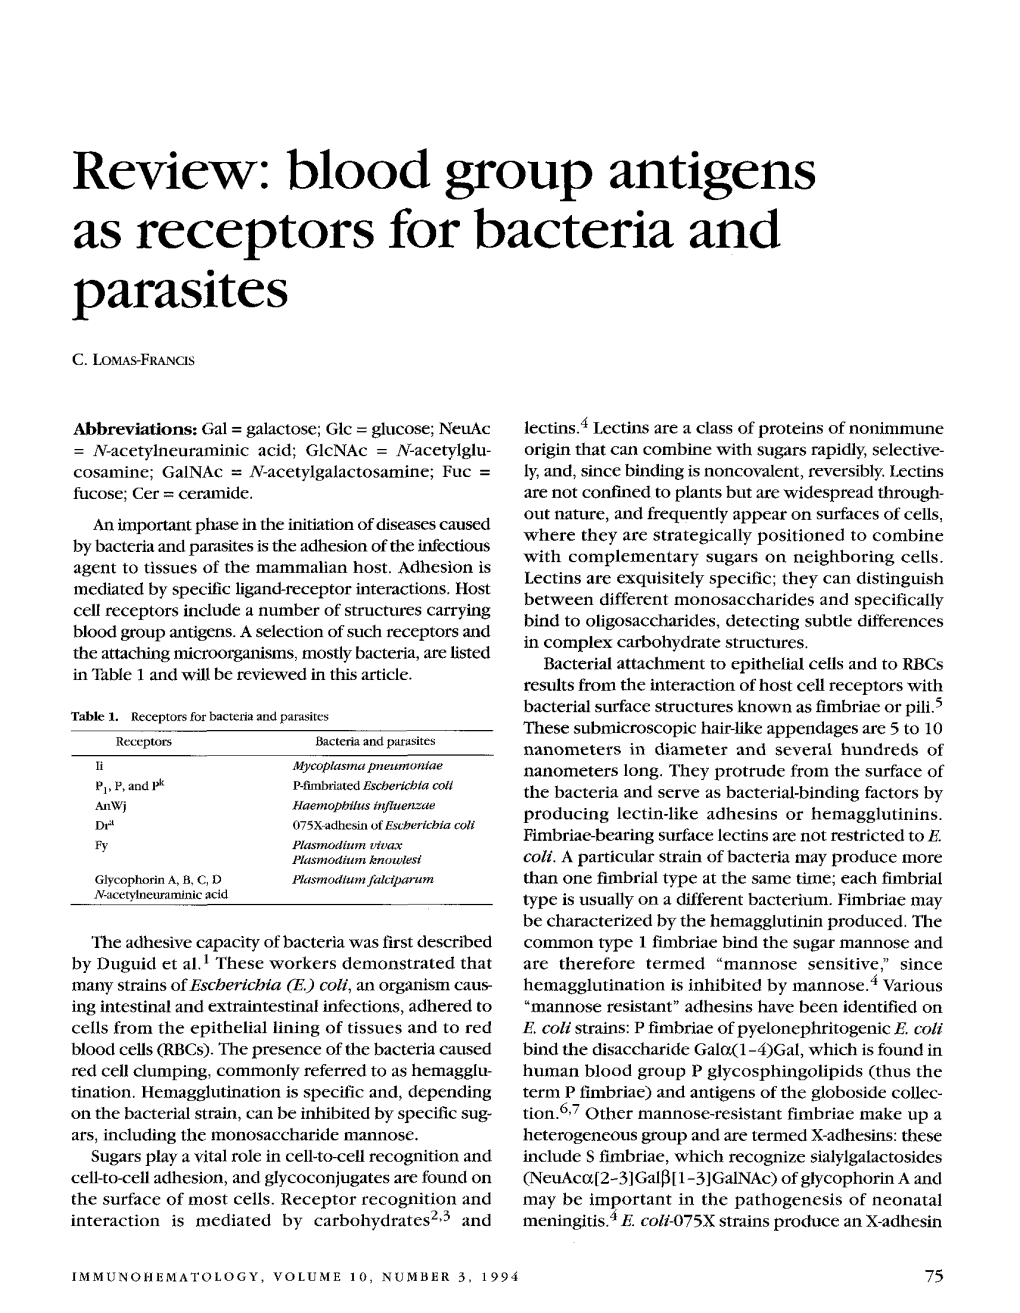 Blood Group Antigens As Receptors for Bacteria and Parasites